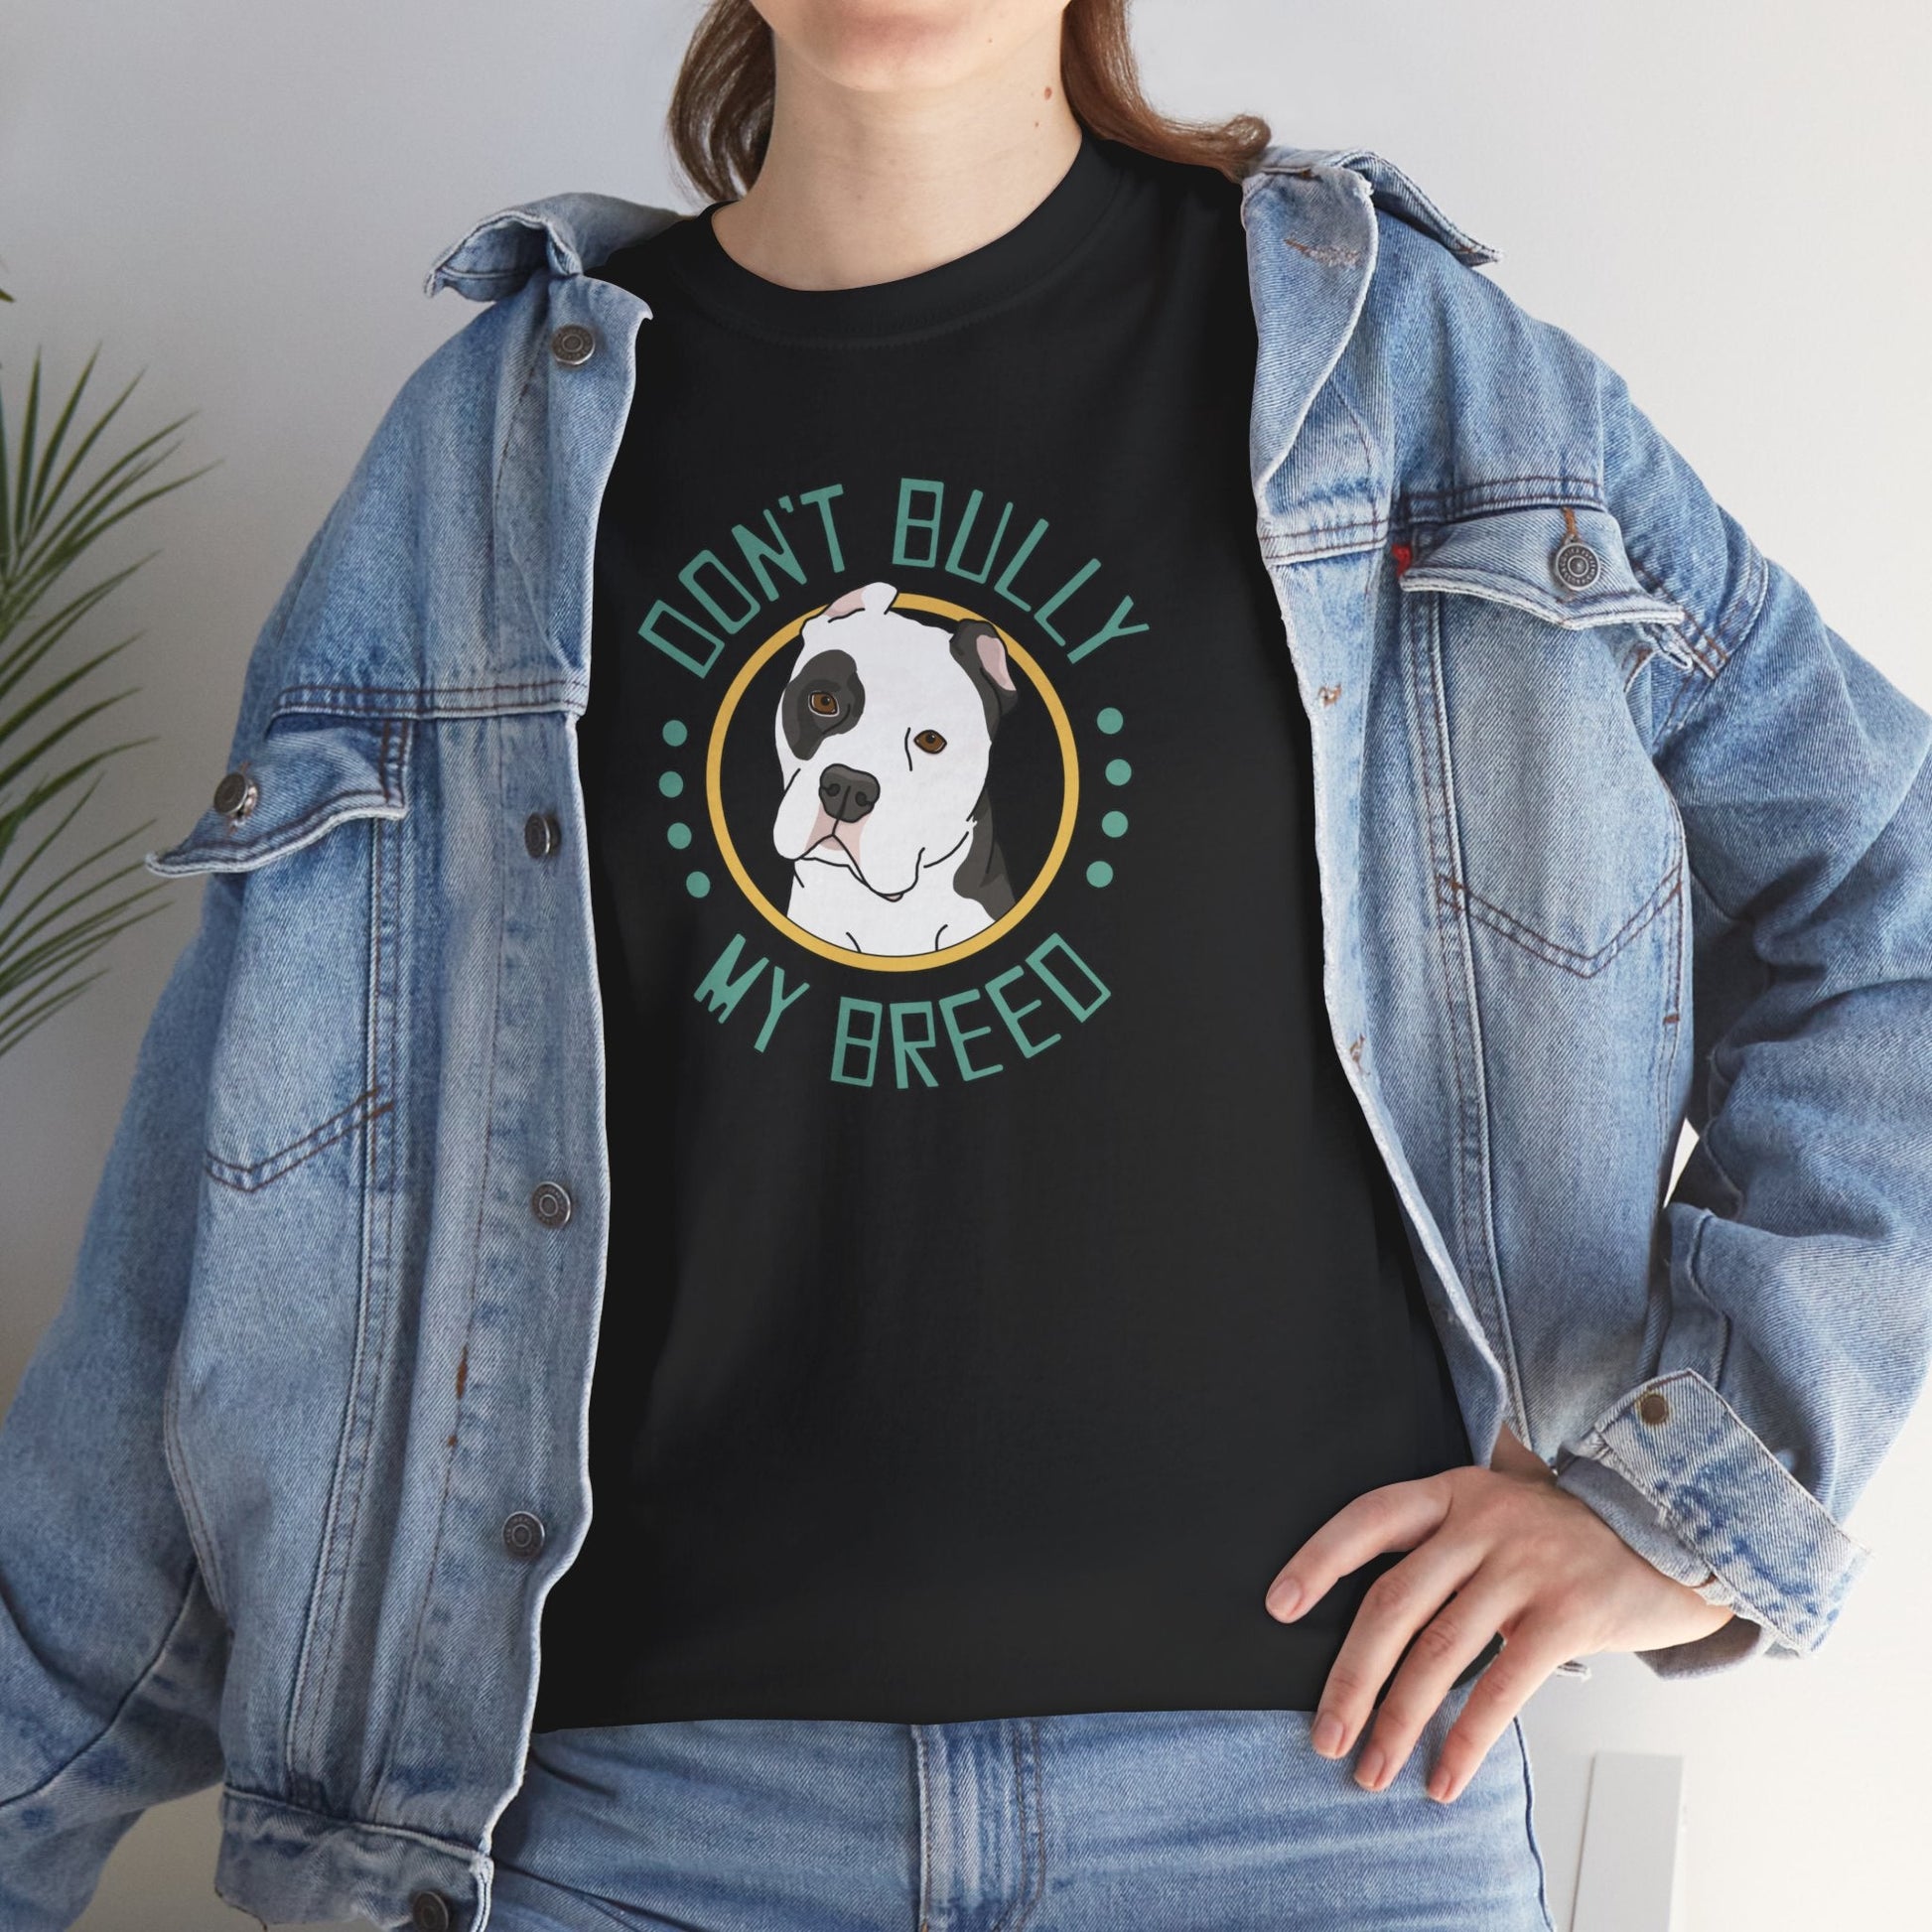 Don't Bully My Breed - Cropped Ears | Unisex T-shirt - Detezi Designs-32012777466238959743